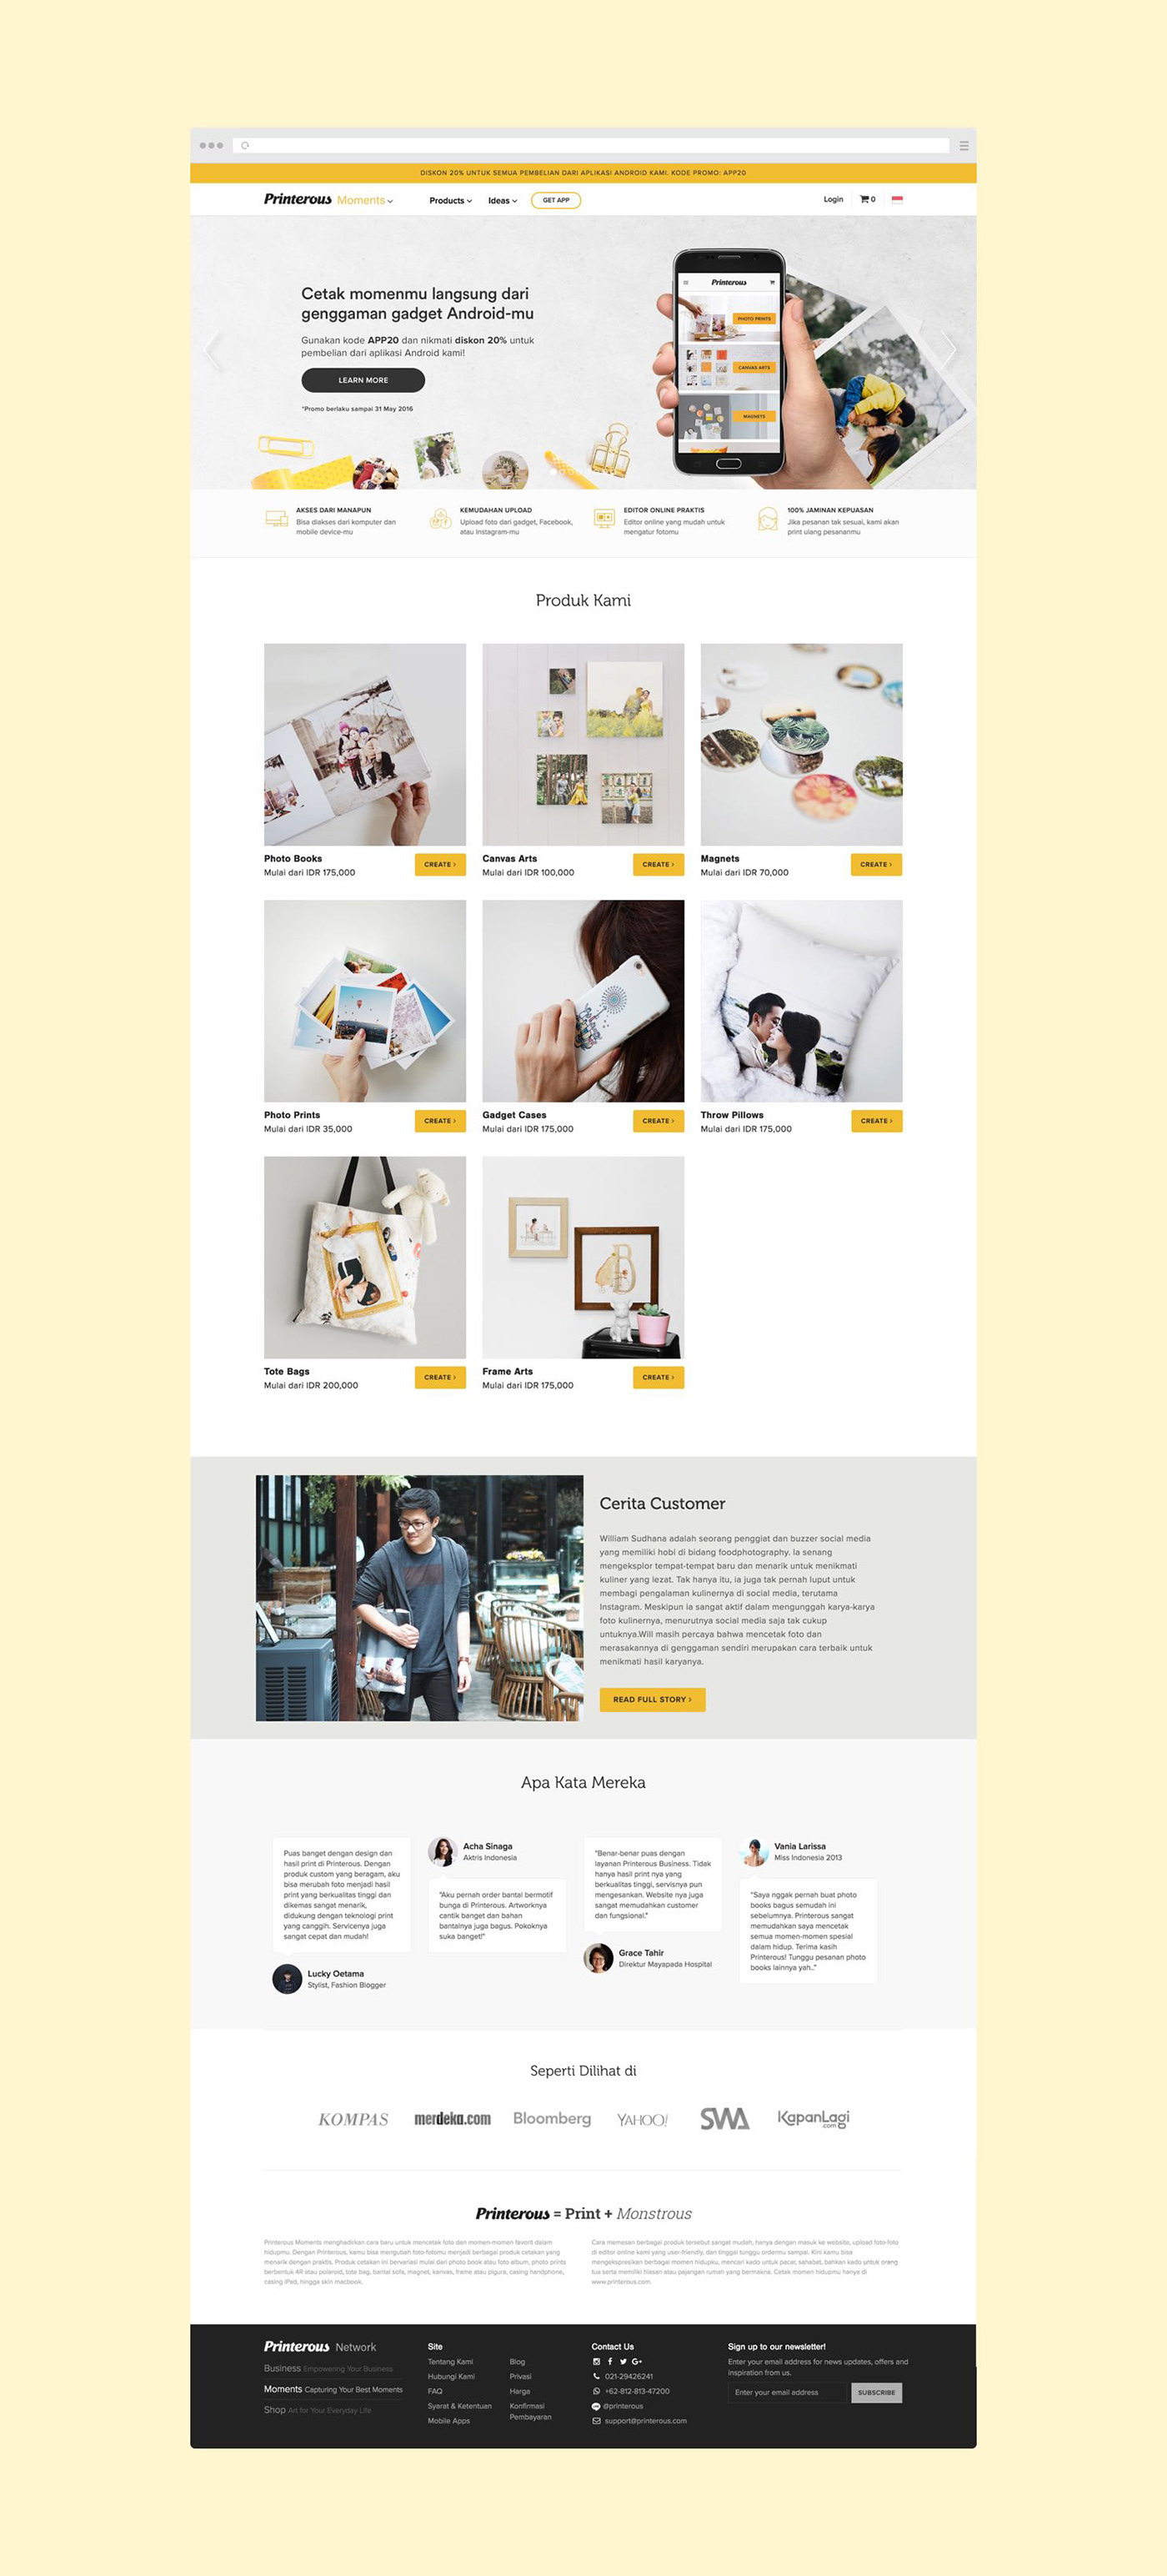 canvas art colorful landing page on-demand printing photo books Print on demand printerous printing company society6 Website